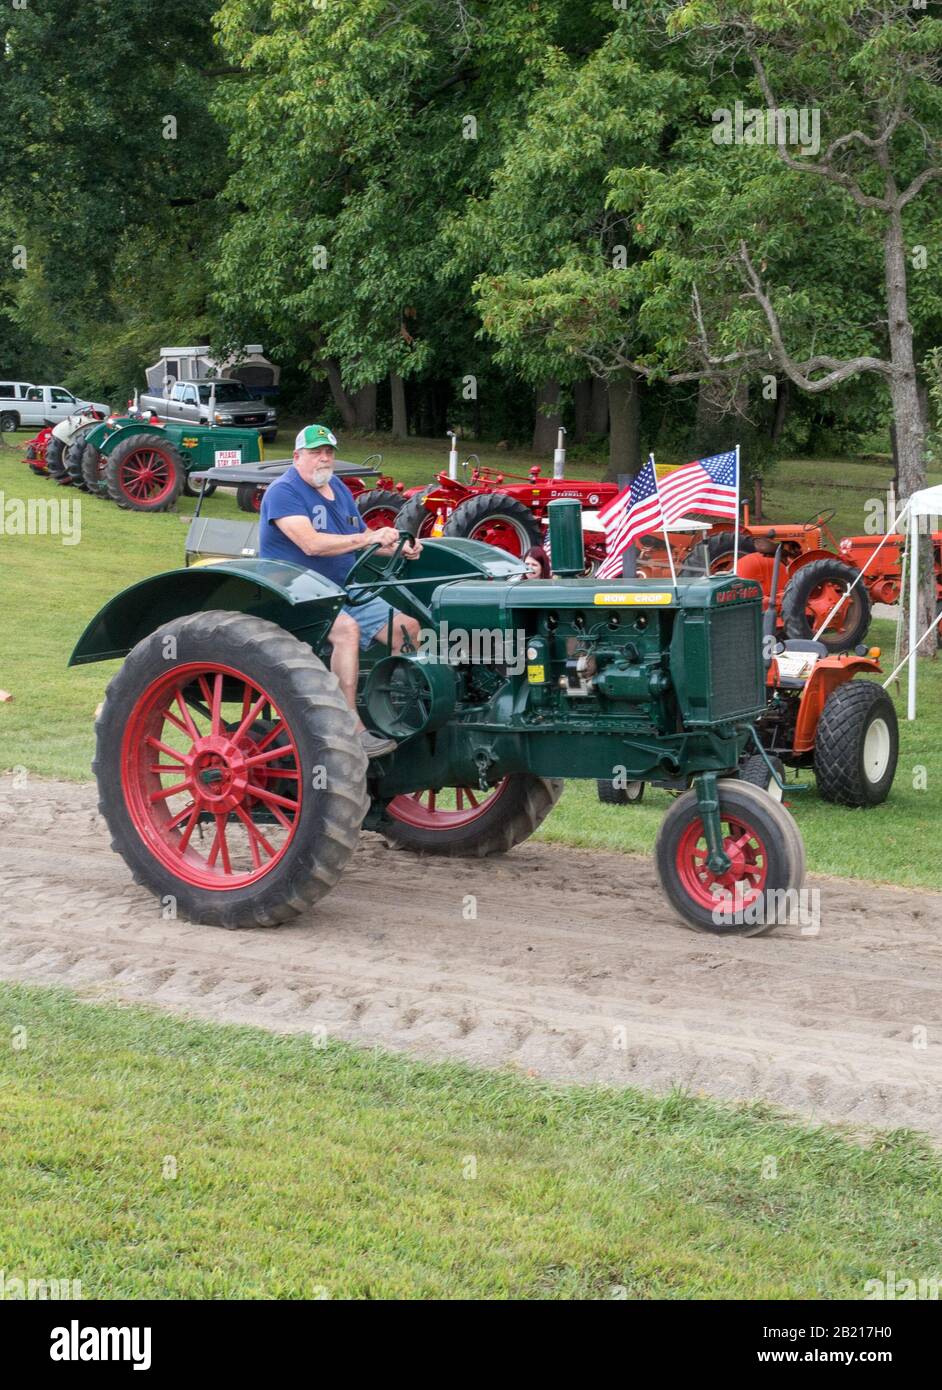 Hesston Indiana USA Aug 31 2019; a man drives a vintage tractor past rows of other antique tractors during the Hesston steam days show Stock Photo